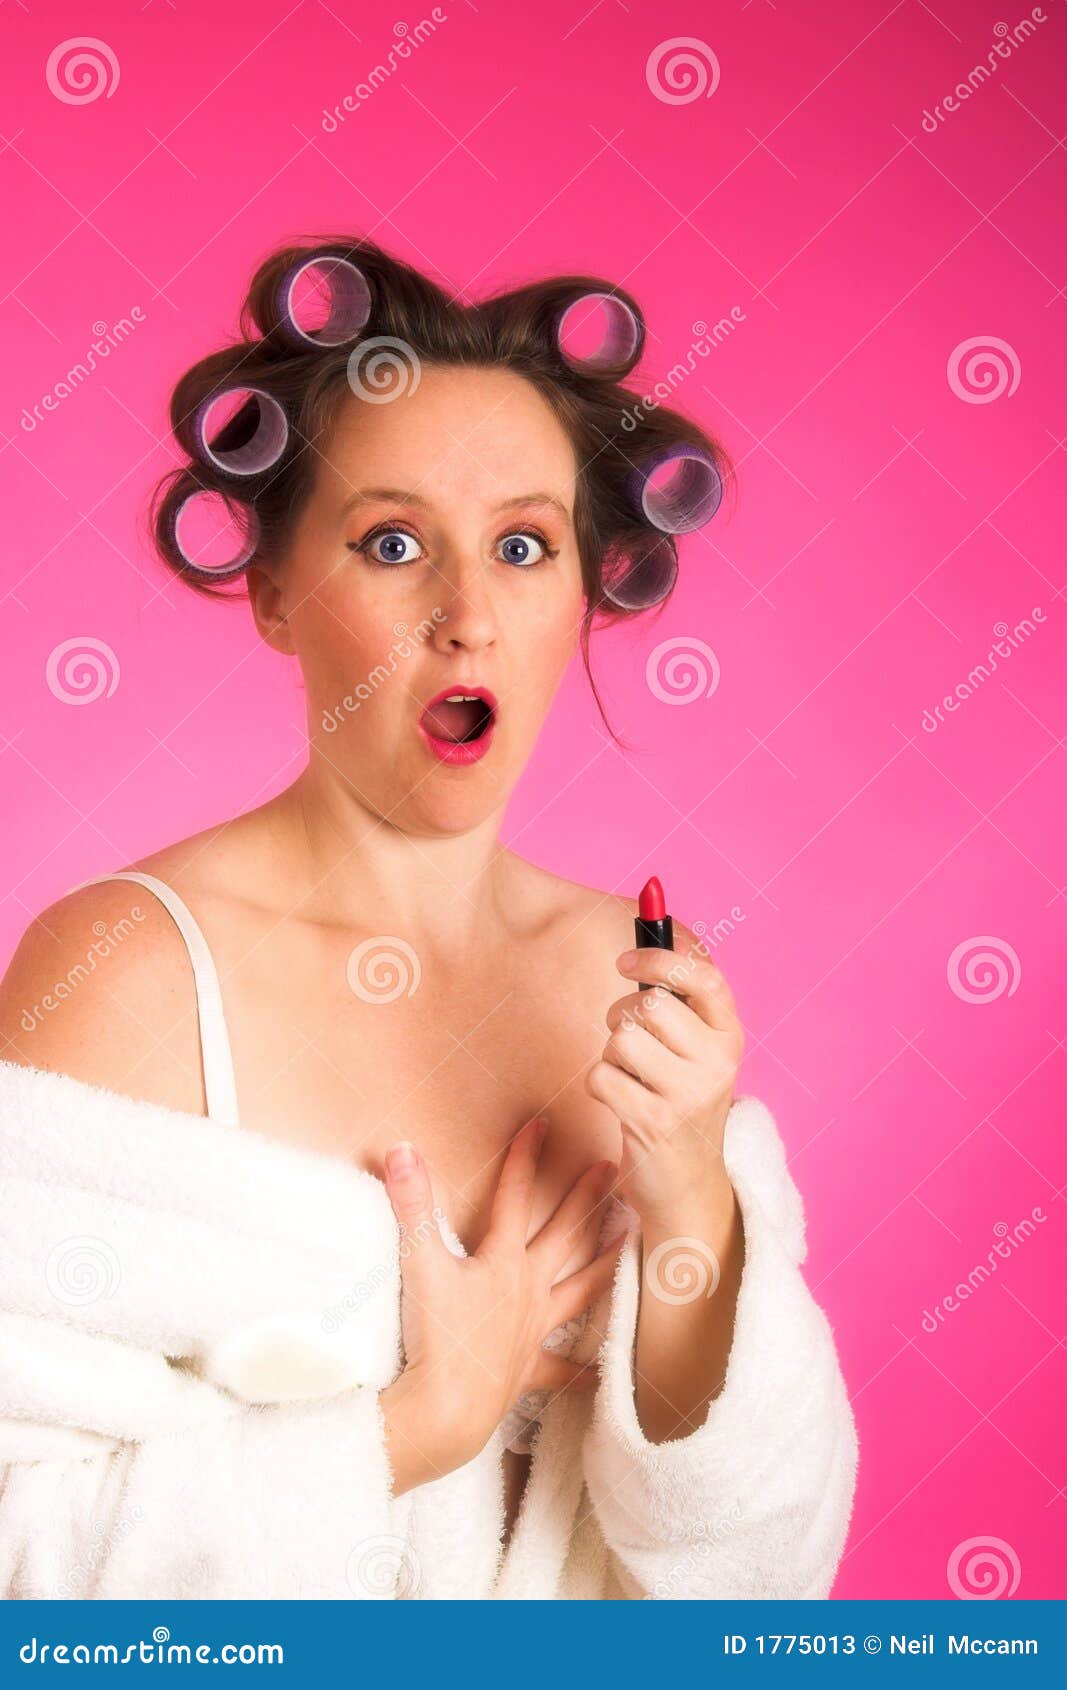 woman in hair rollers and robe